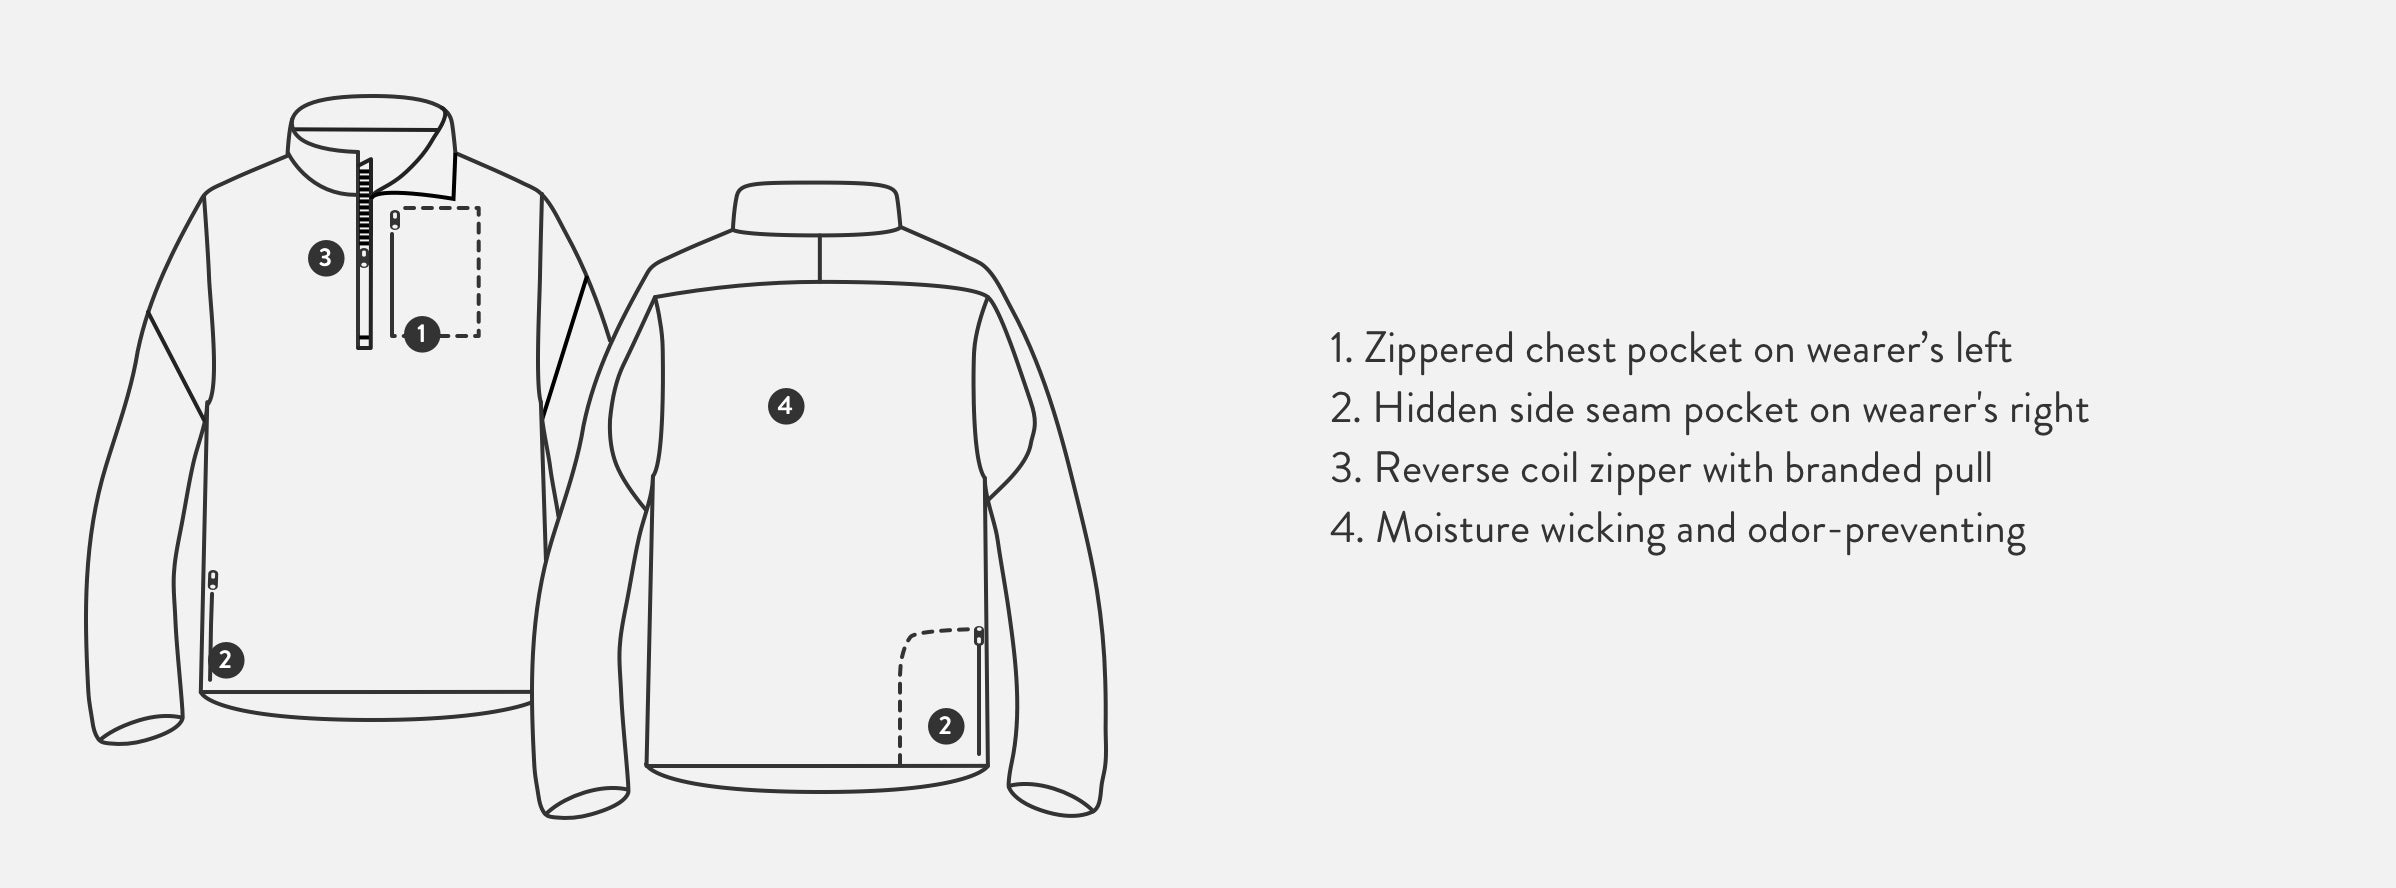 Illustrated graphic of Blaze pullover product details